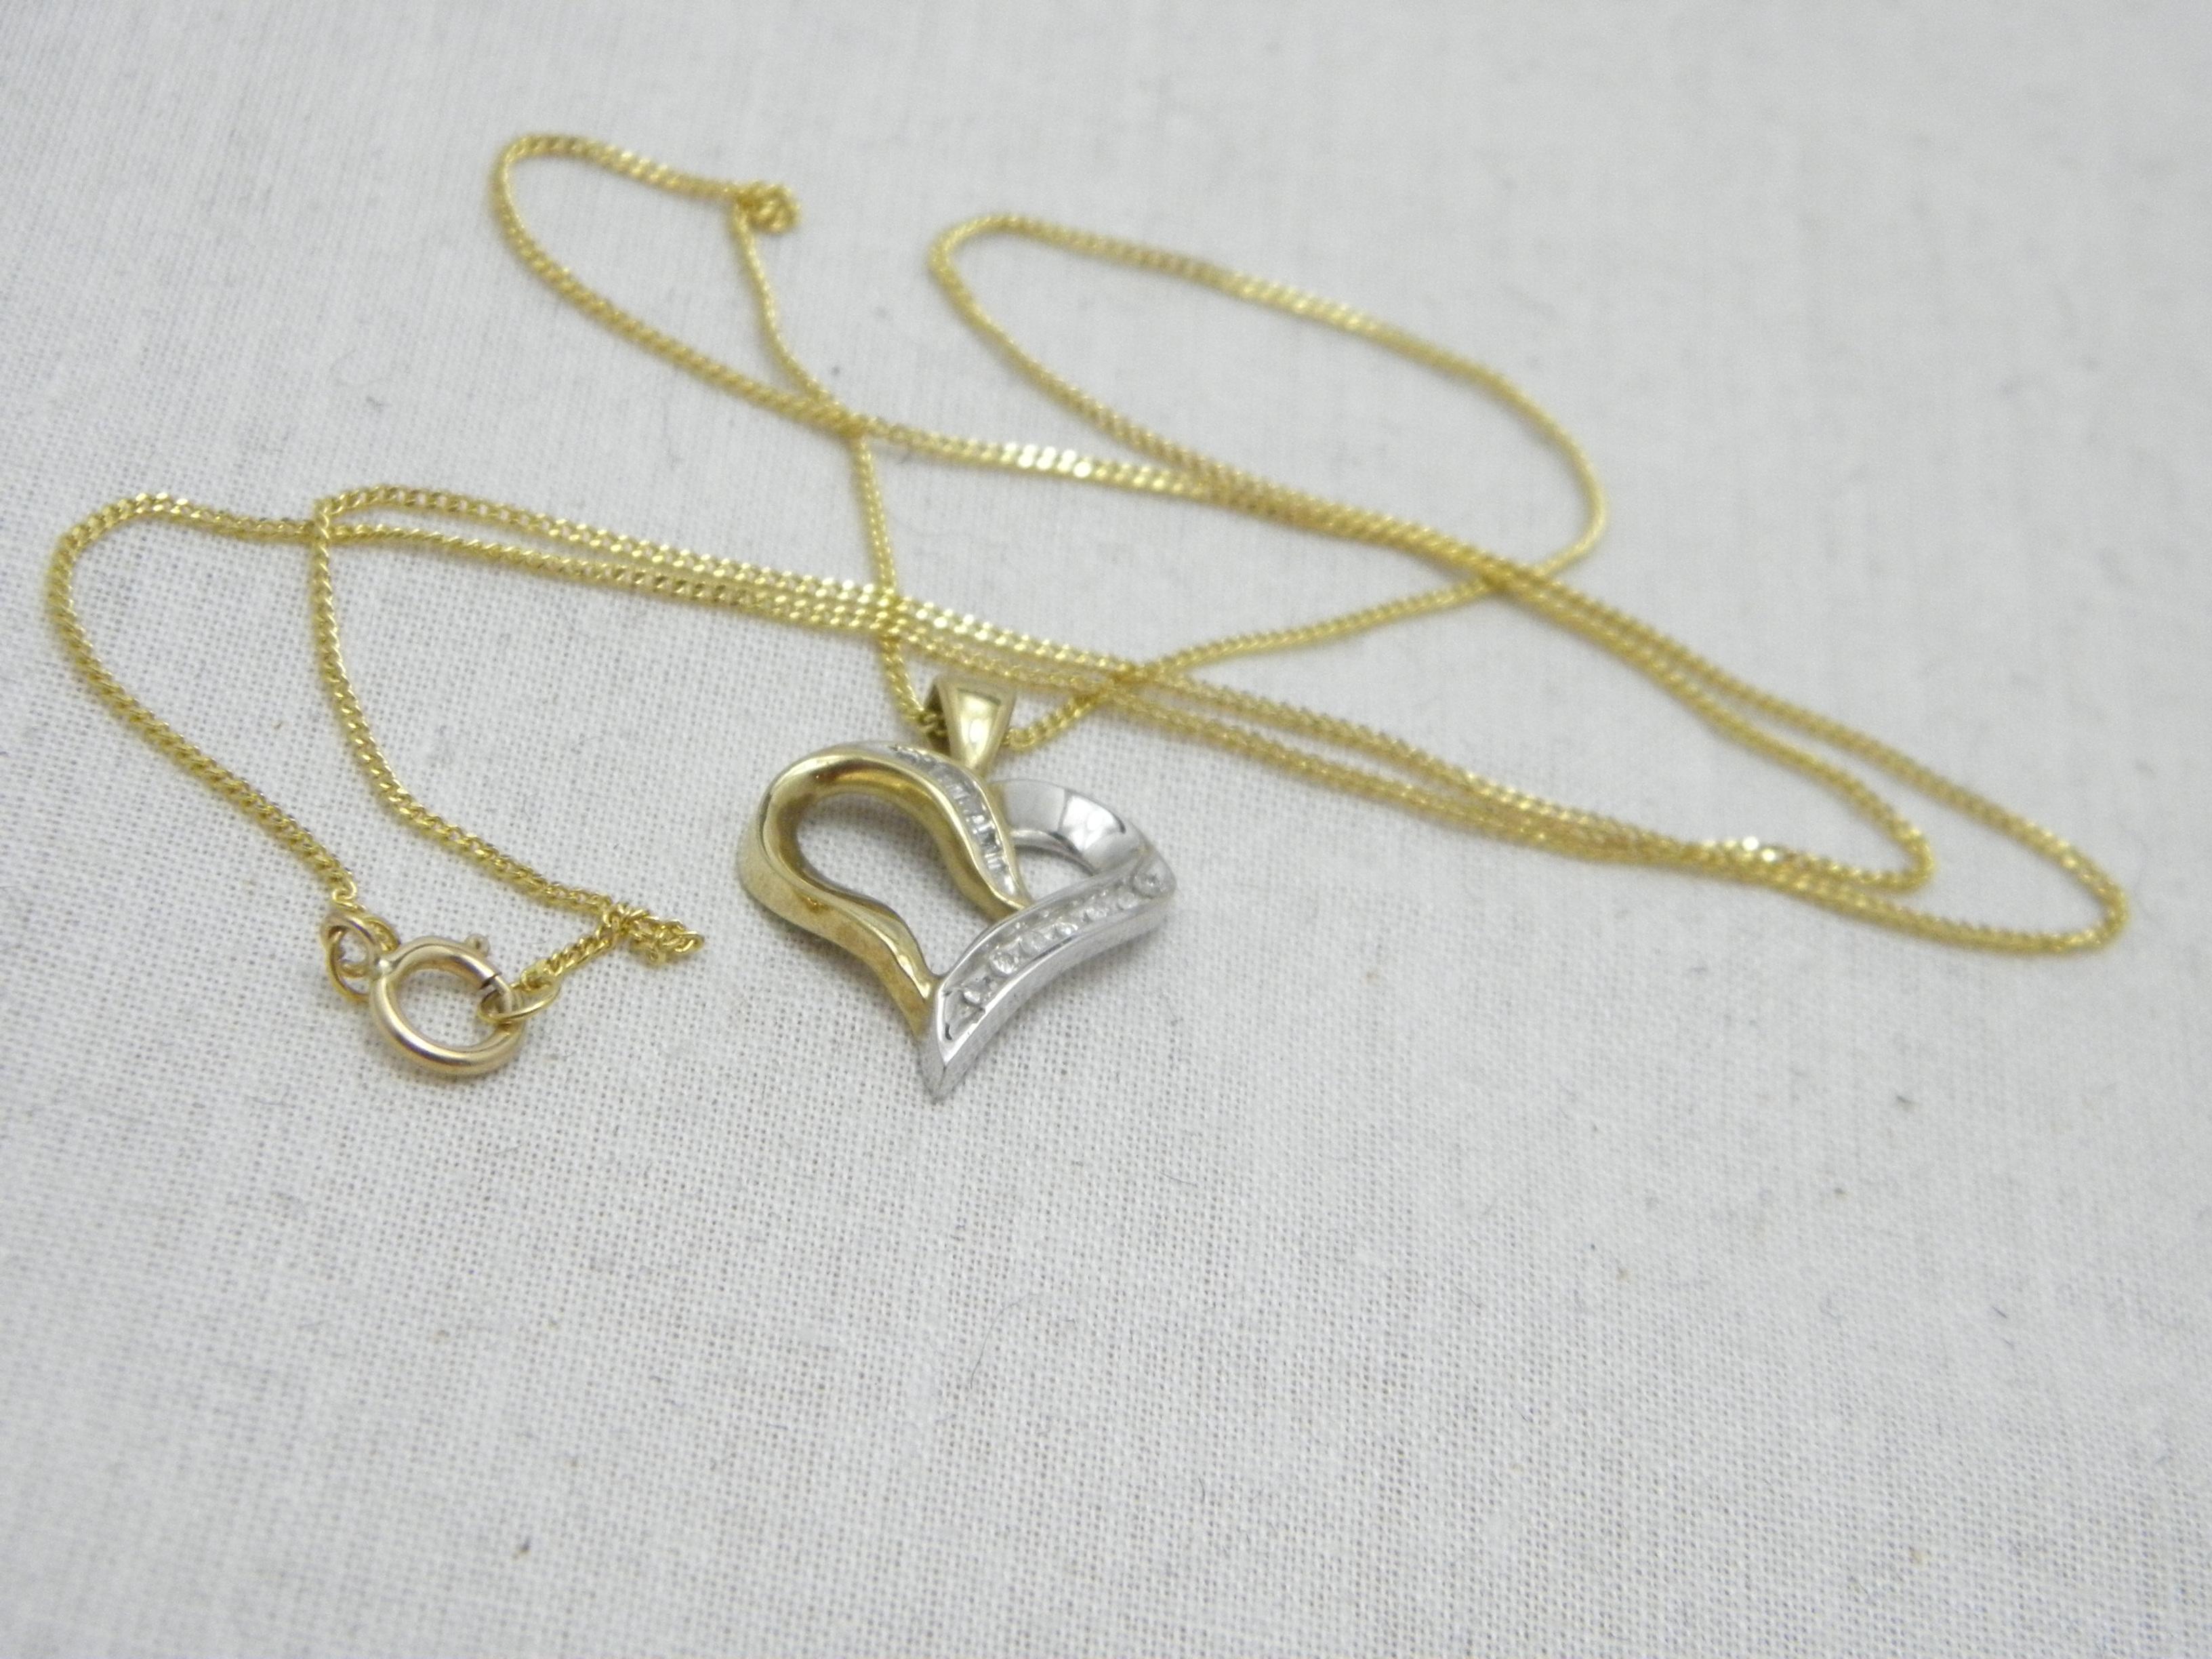 Vintage 9ct Gold 0.25 Cttw Diamond Heart Pendant Necklace Curb Chain 375 20 Inch For Sale 5